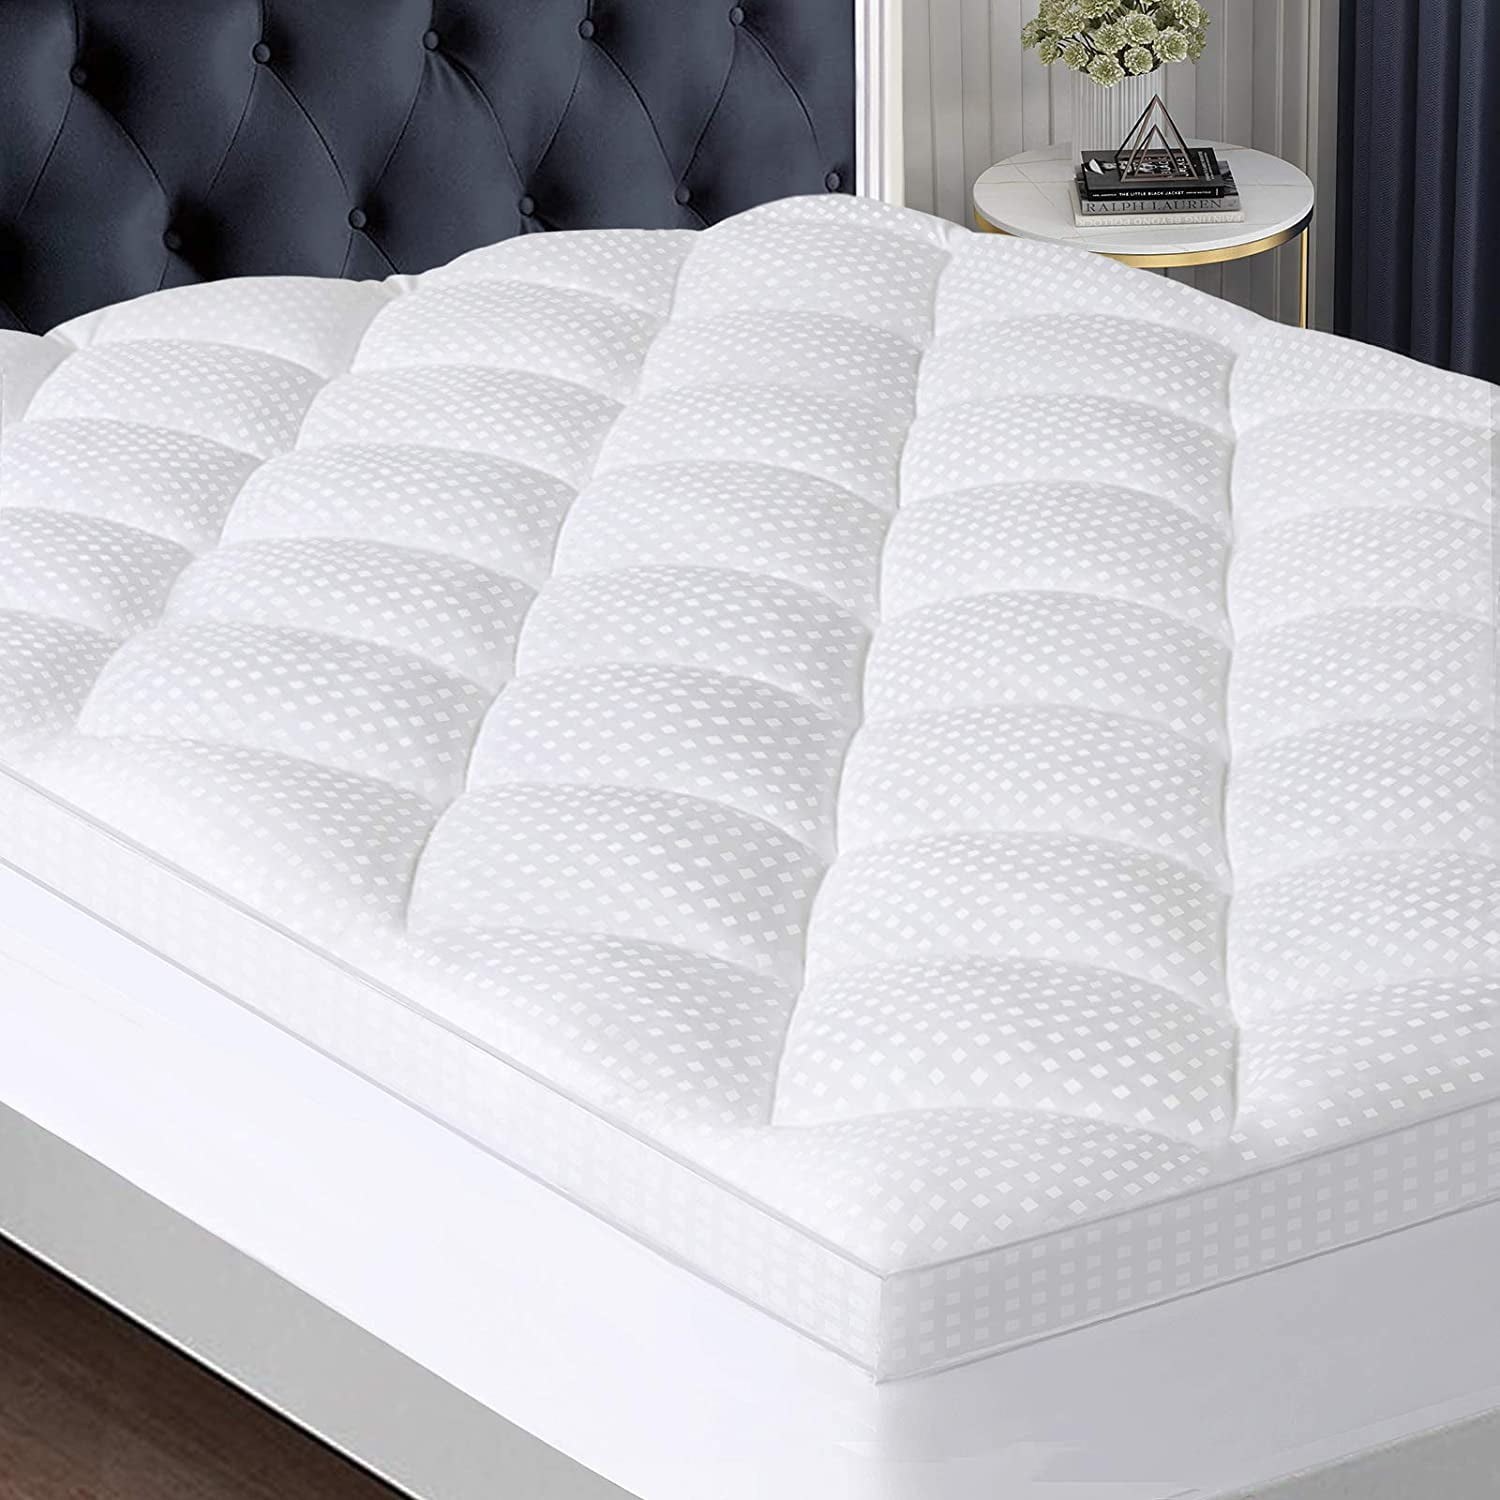 Queen Mattress Pad Cover Cooling Mattress Topper Pillow Top Cotton Top with Down Alternative Fill 8-21” Fitted Deep Pocket Queen Size 